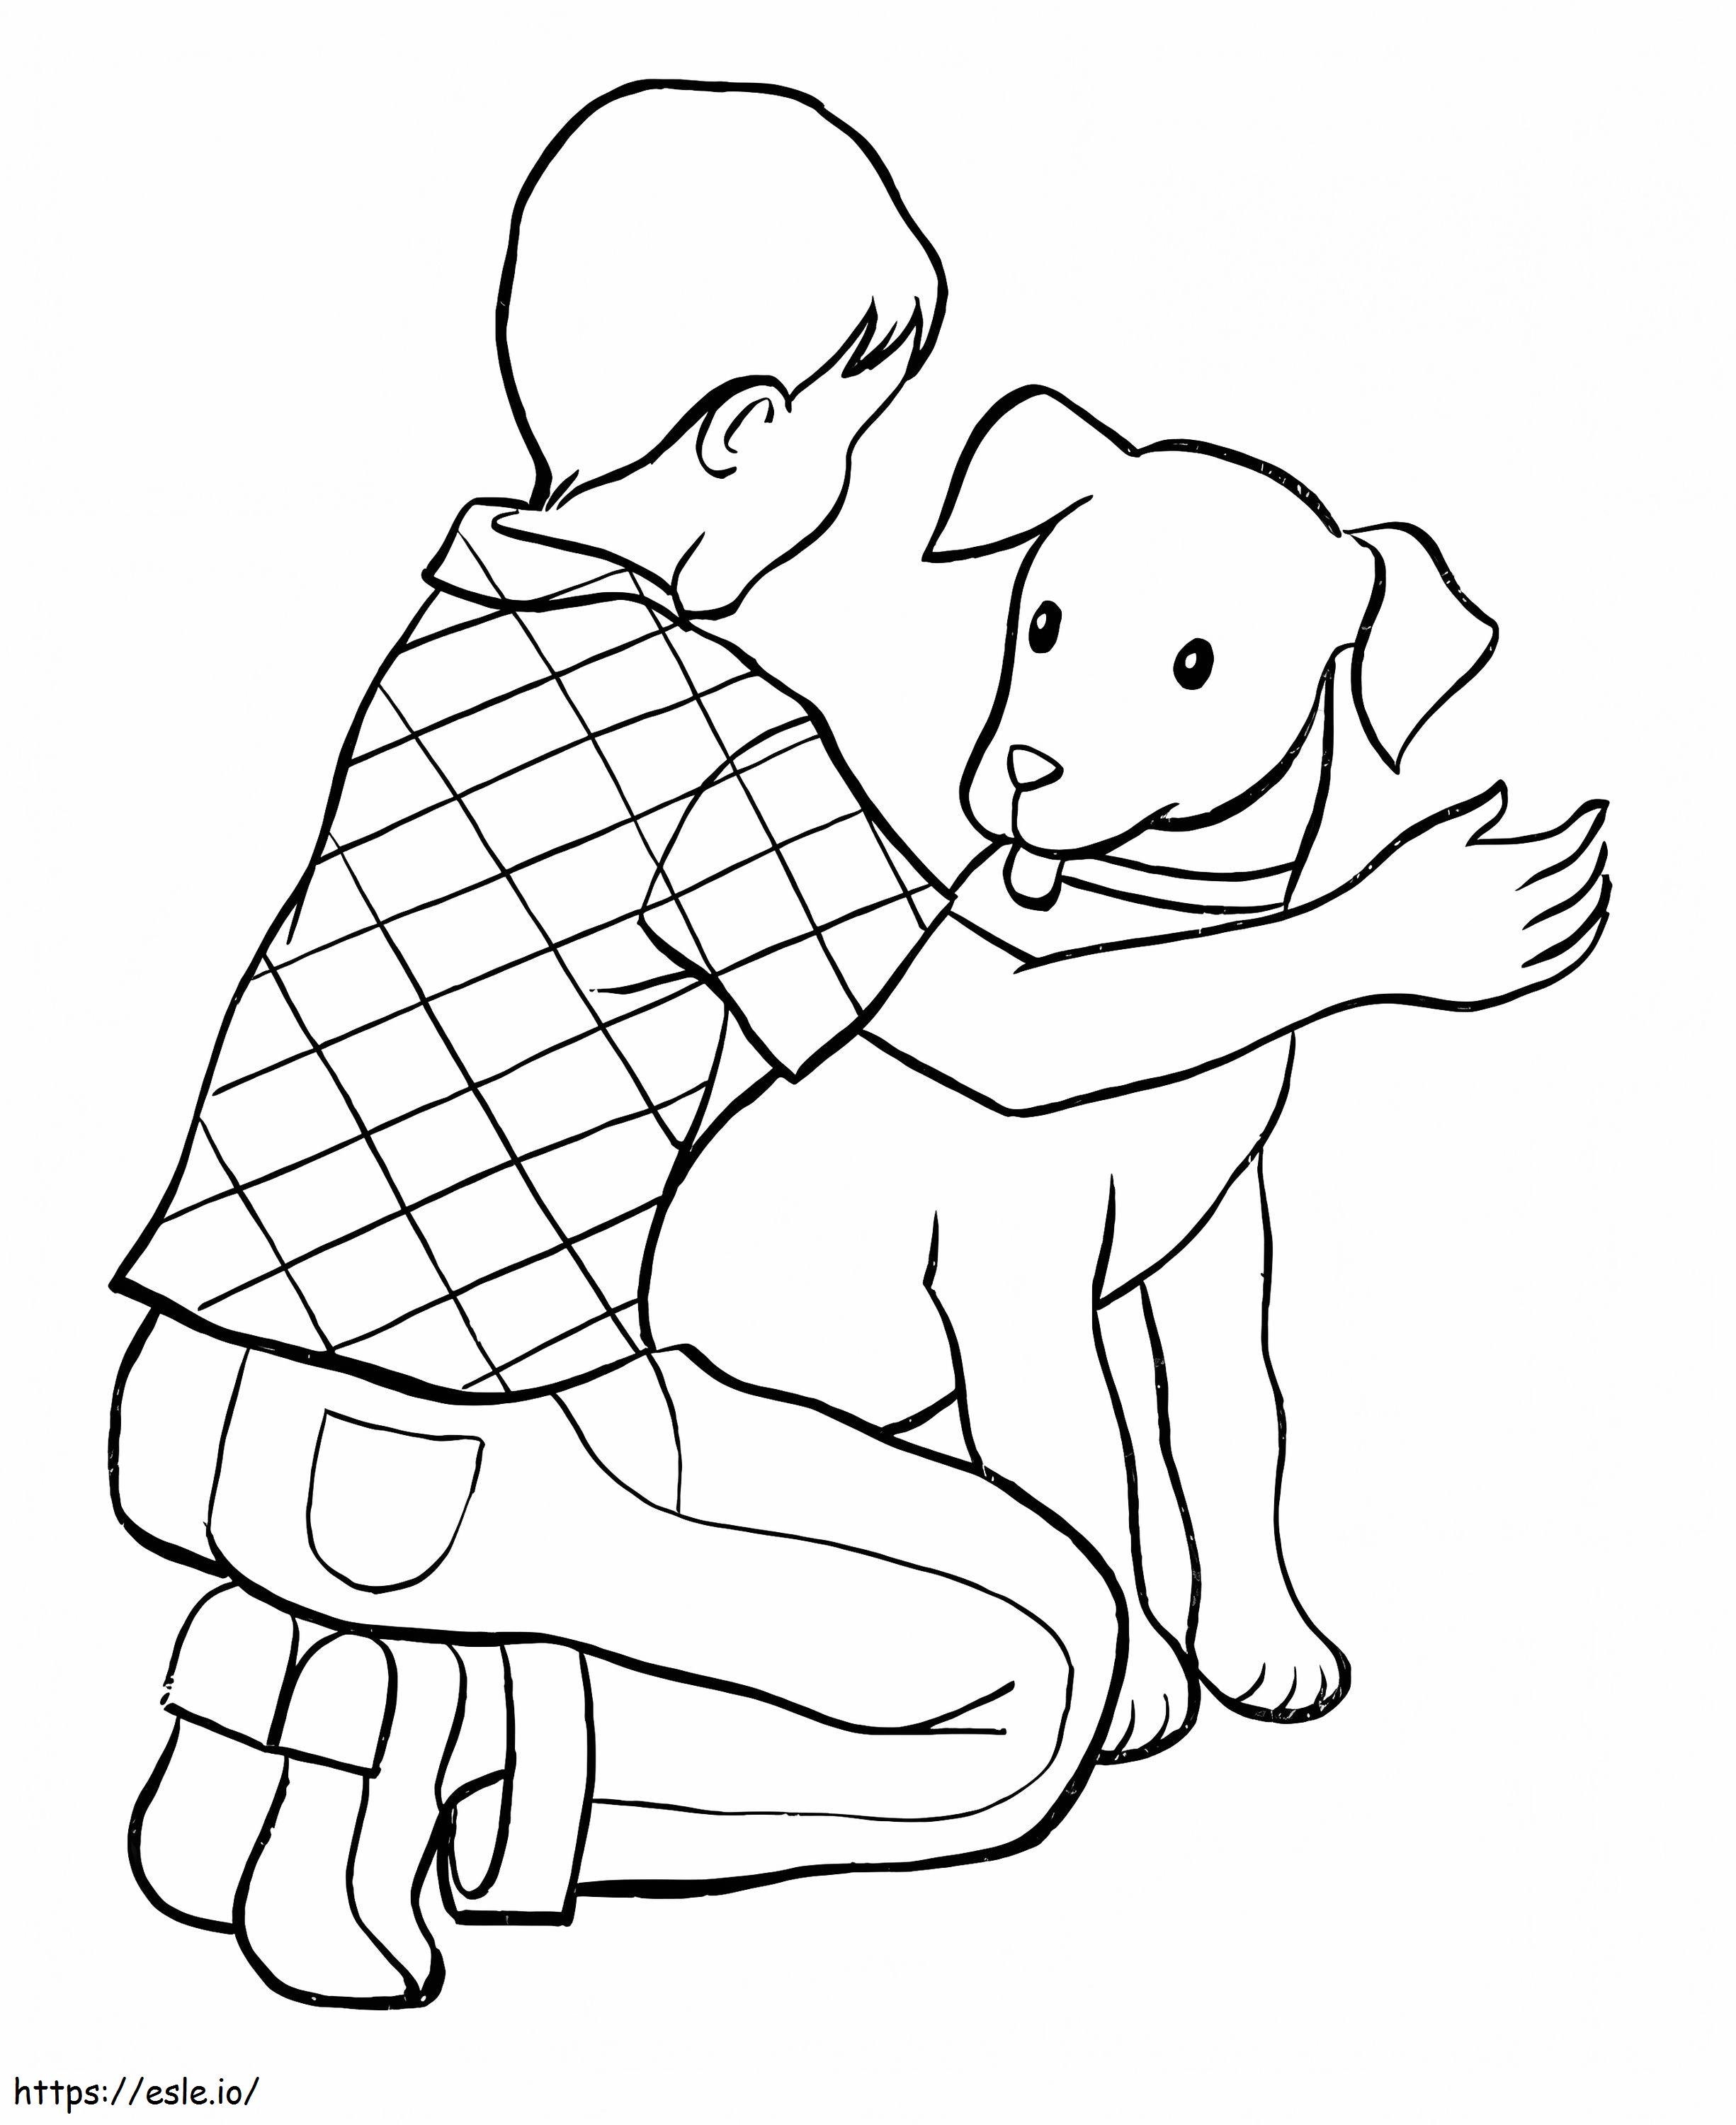 Boy And Pet Dog coloring page